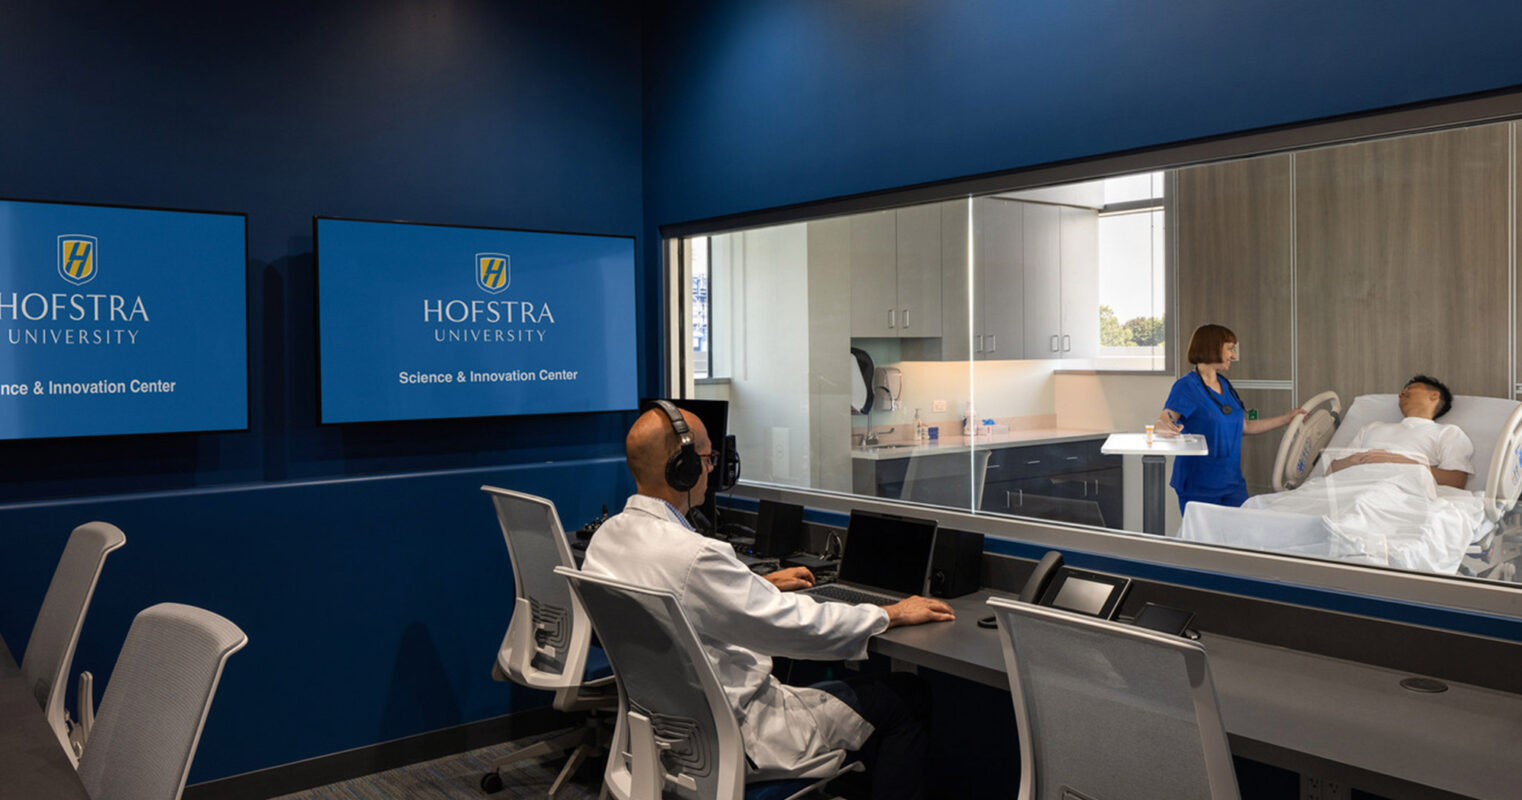 Modern, functional educational facility with observation room featuring ergonomic seating, dual-monitor workstations, glass partition for visibility, and active learning setup with a patient simulation on the adjacent room, showcasing Hofstra University branding on prominently displayed wall signage.